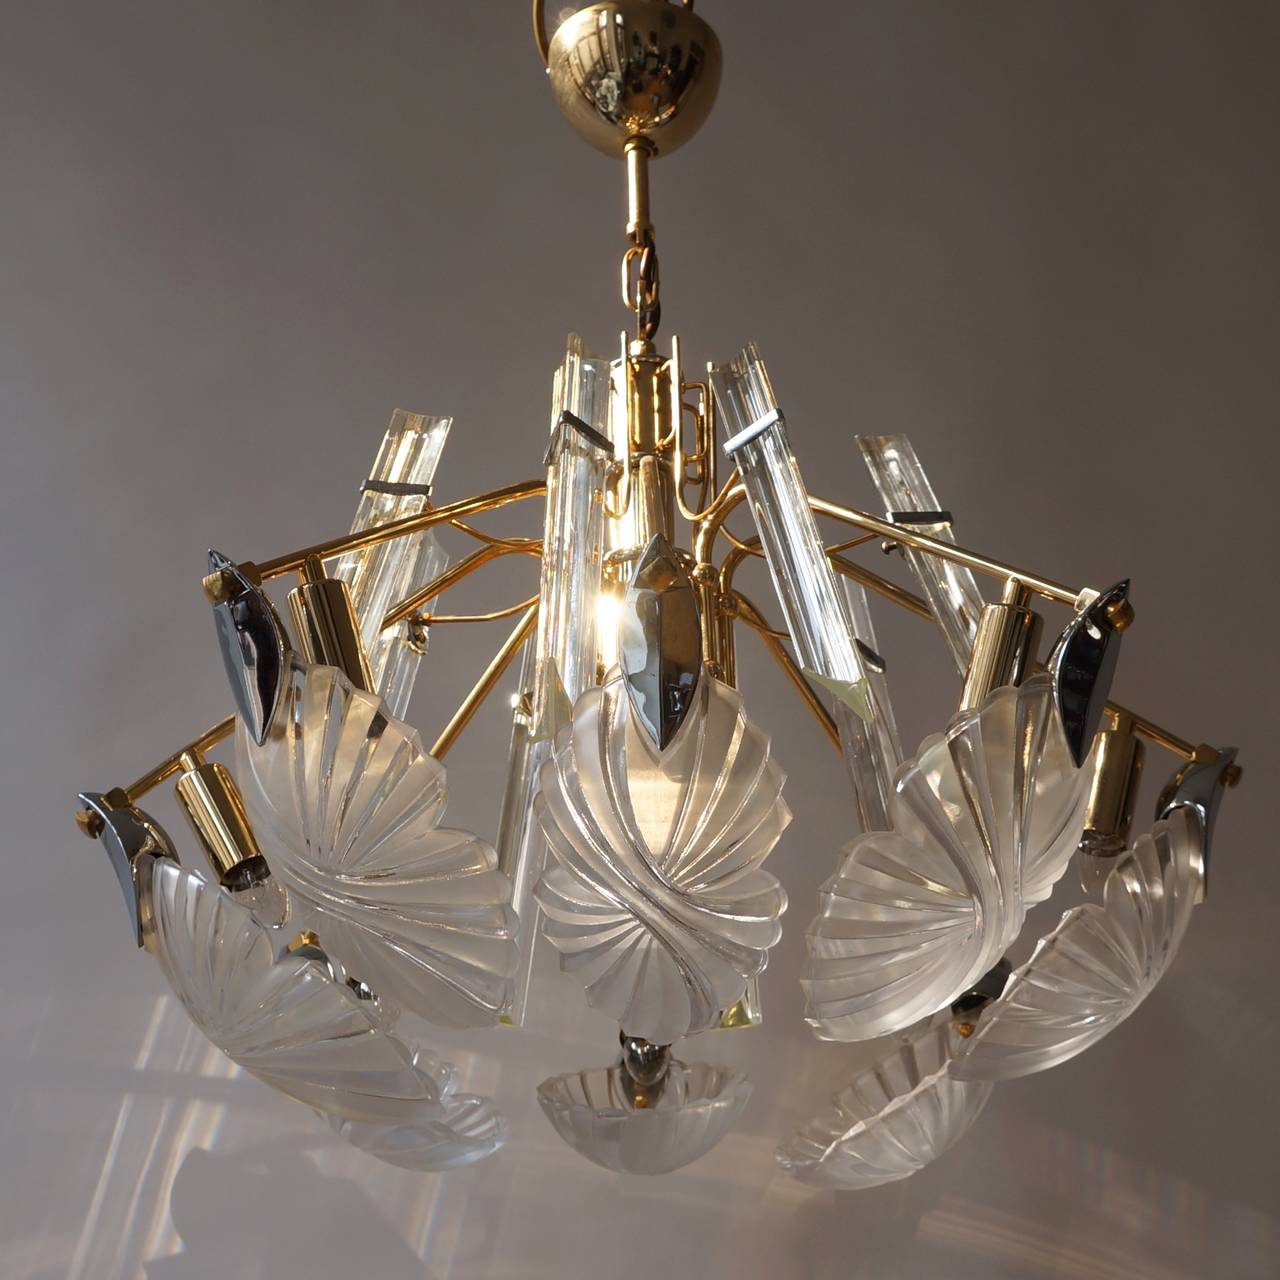 Bakalowits gold-plated crystal chandelier.
Very exclusive and high quality chandelier by Bakalowits & Sohne from the 1960s. It is made of handcut crystals and a gold-plated frame. Excellent condition with very little patina on top of the